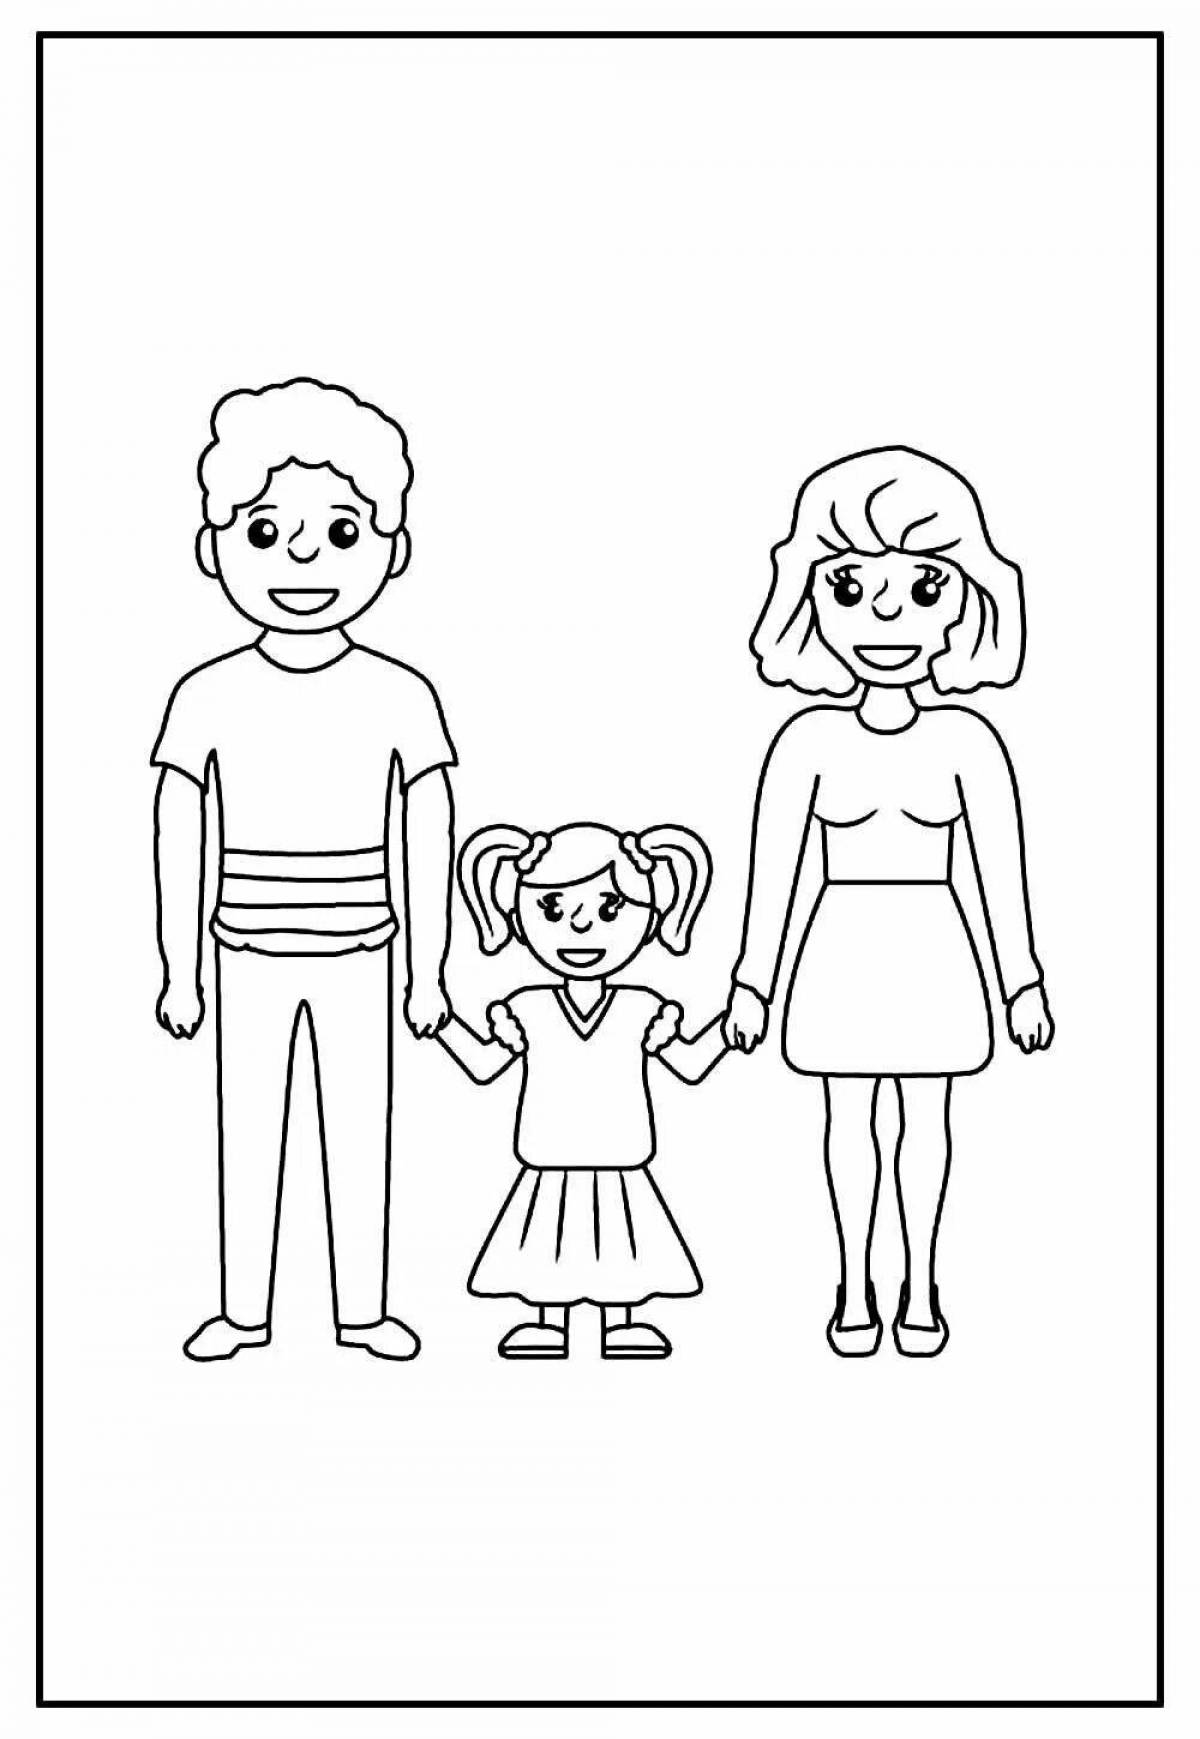 Coloured family coloring book for girls